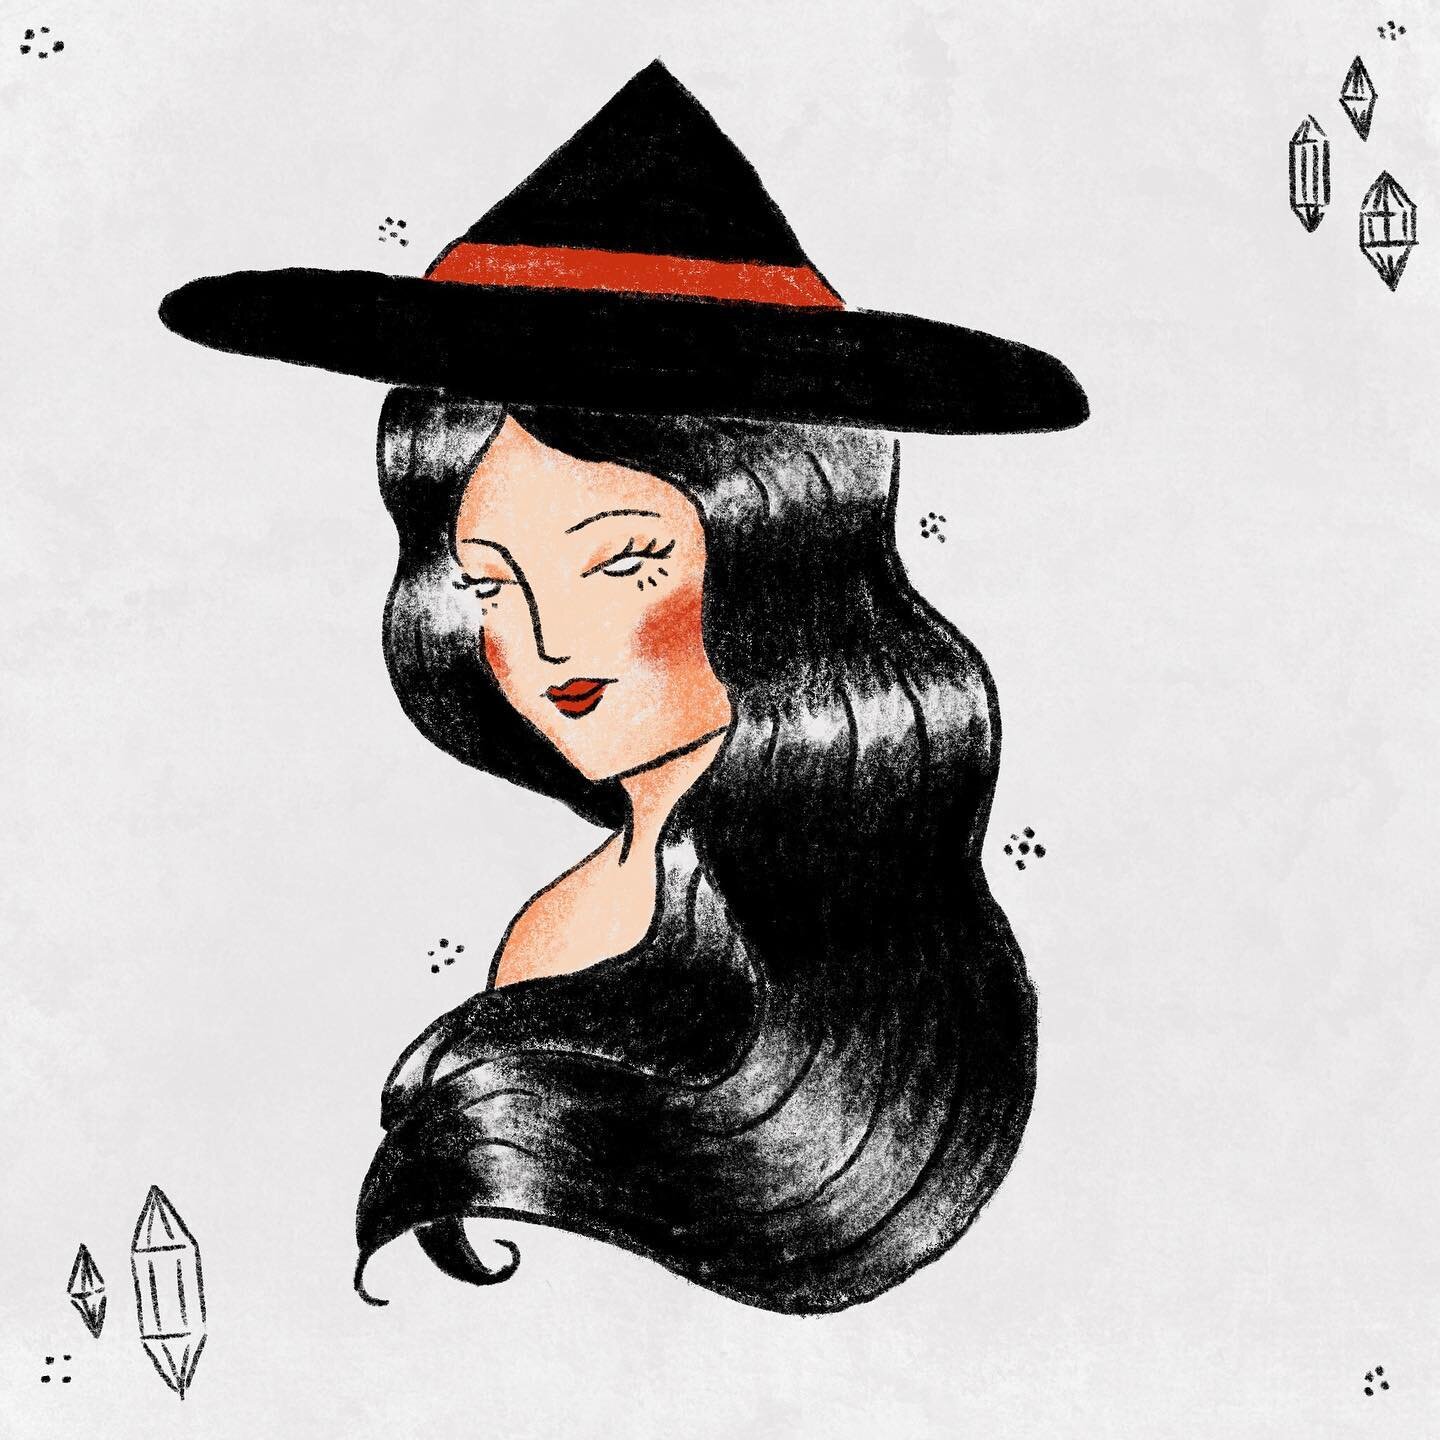 the first witch of many
.
.
.
.
.
.
.
.
#illustration #illustrator #illustragram #illustrations #illustrationoftheday #drawing #drawingoftheday #dailydrawing #art #artwork #witch #witchcraft #witchesofinstagram #witchyvibes #witchaesthetic #halloween